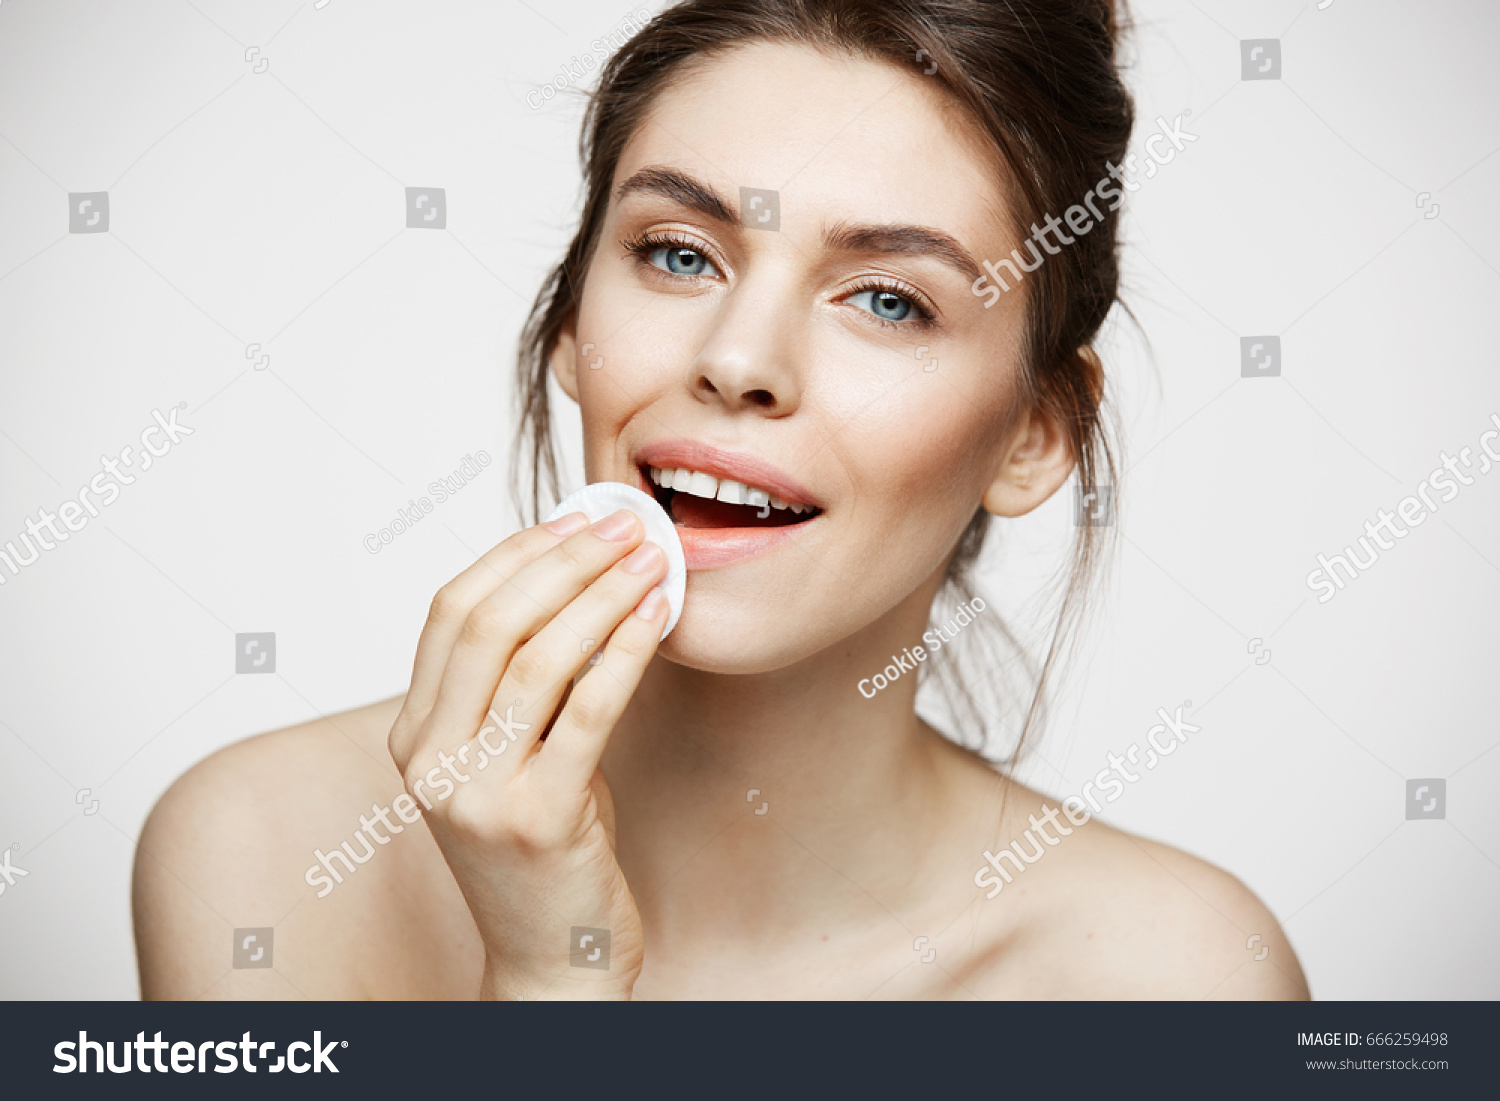 Cute beautiful natural brunette girl cleaning face with cotton sponge smiling looking at camera over white background. Cosmetology and spa. #666259498